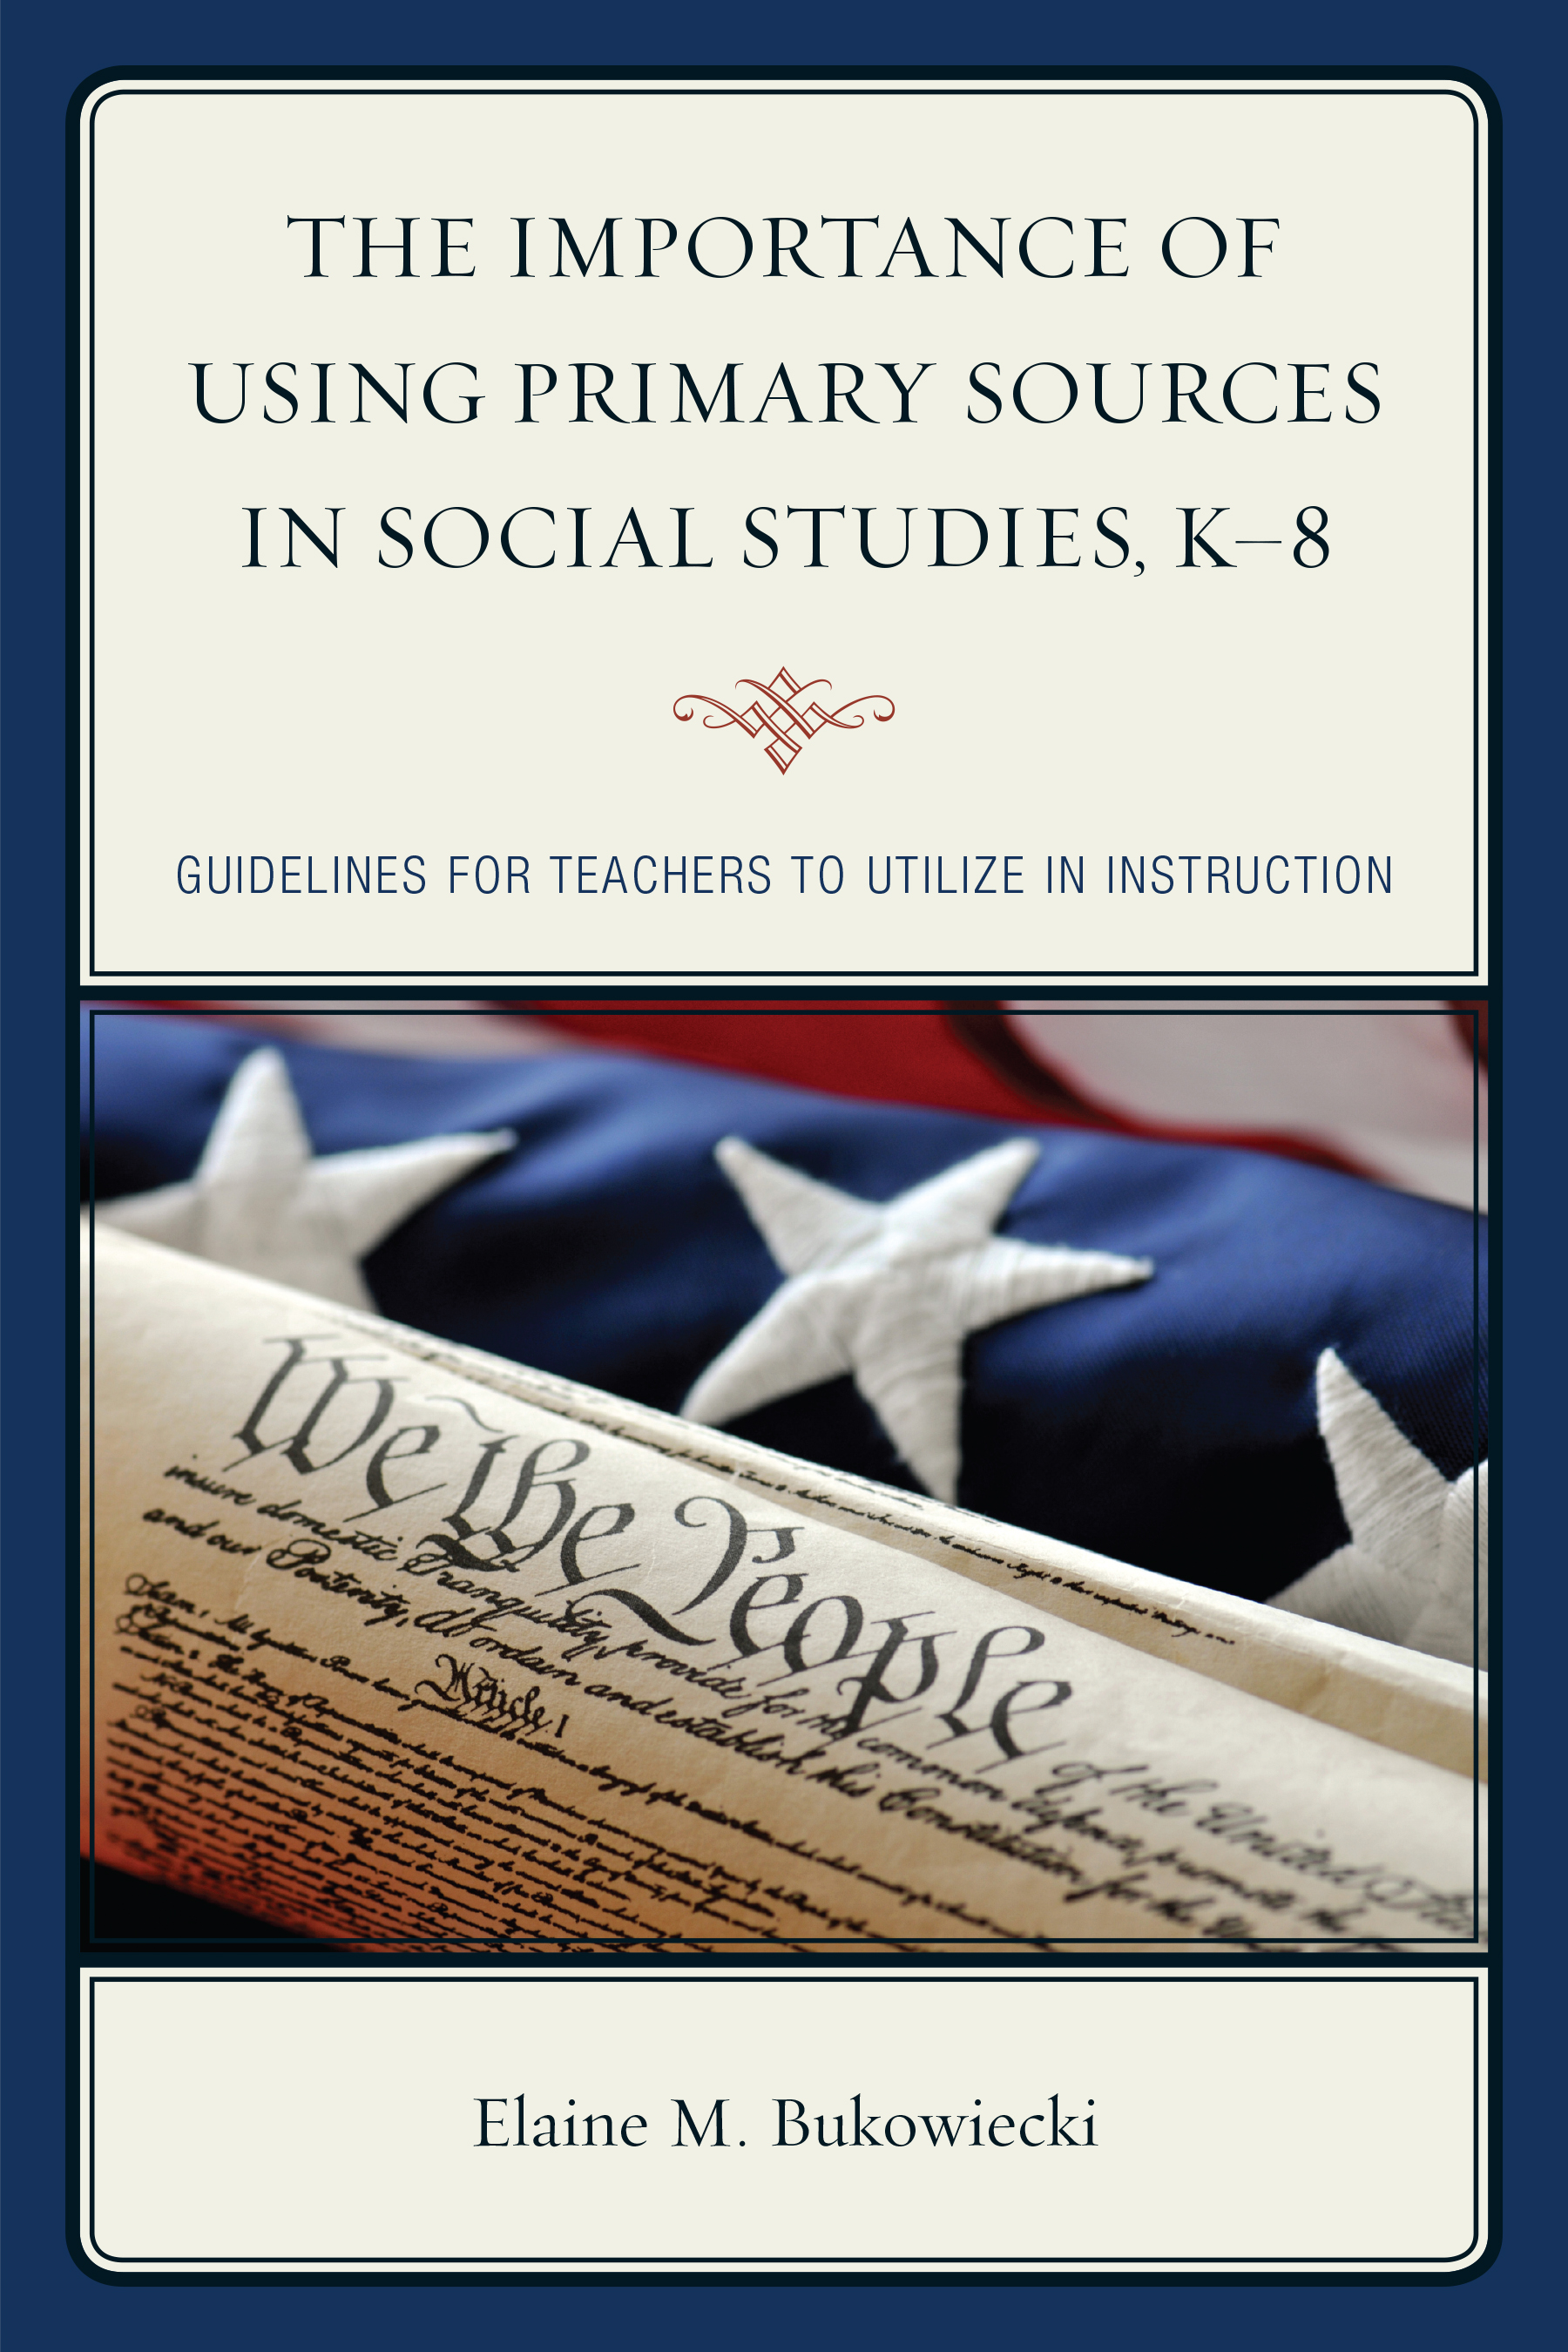 The Importance of Using Primary Sources in Social Studies, K-8: Guidelines for Teachers to Utilize in Instruction